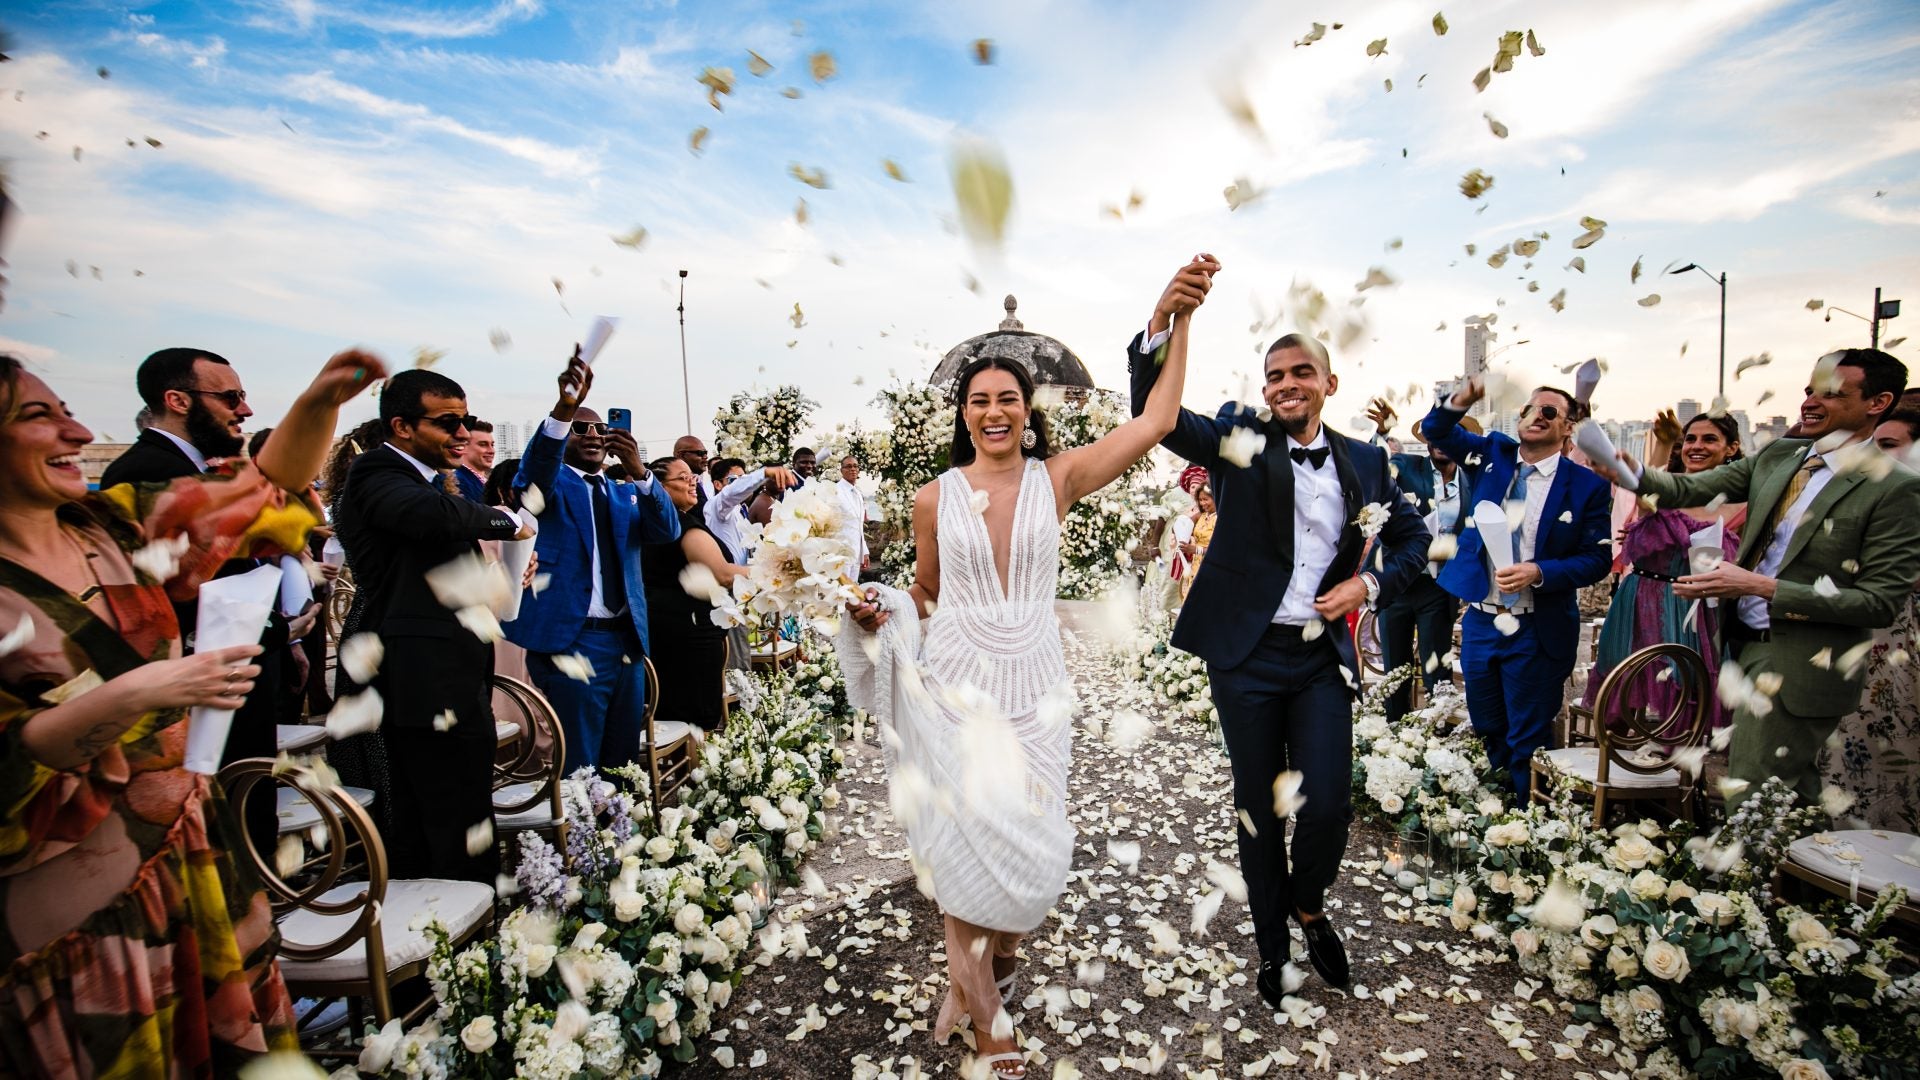 Bridal Bliss: NBC News NOW Anchor Morgan Radford Wed David Williams In A Stunning Celebration In Colombia